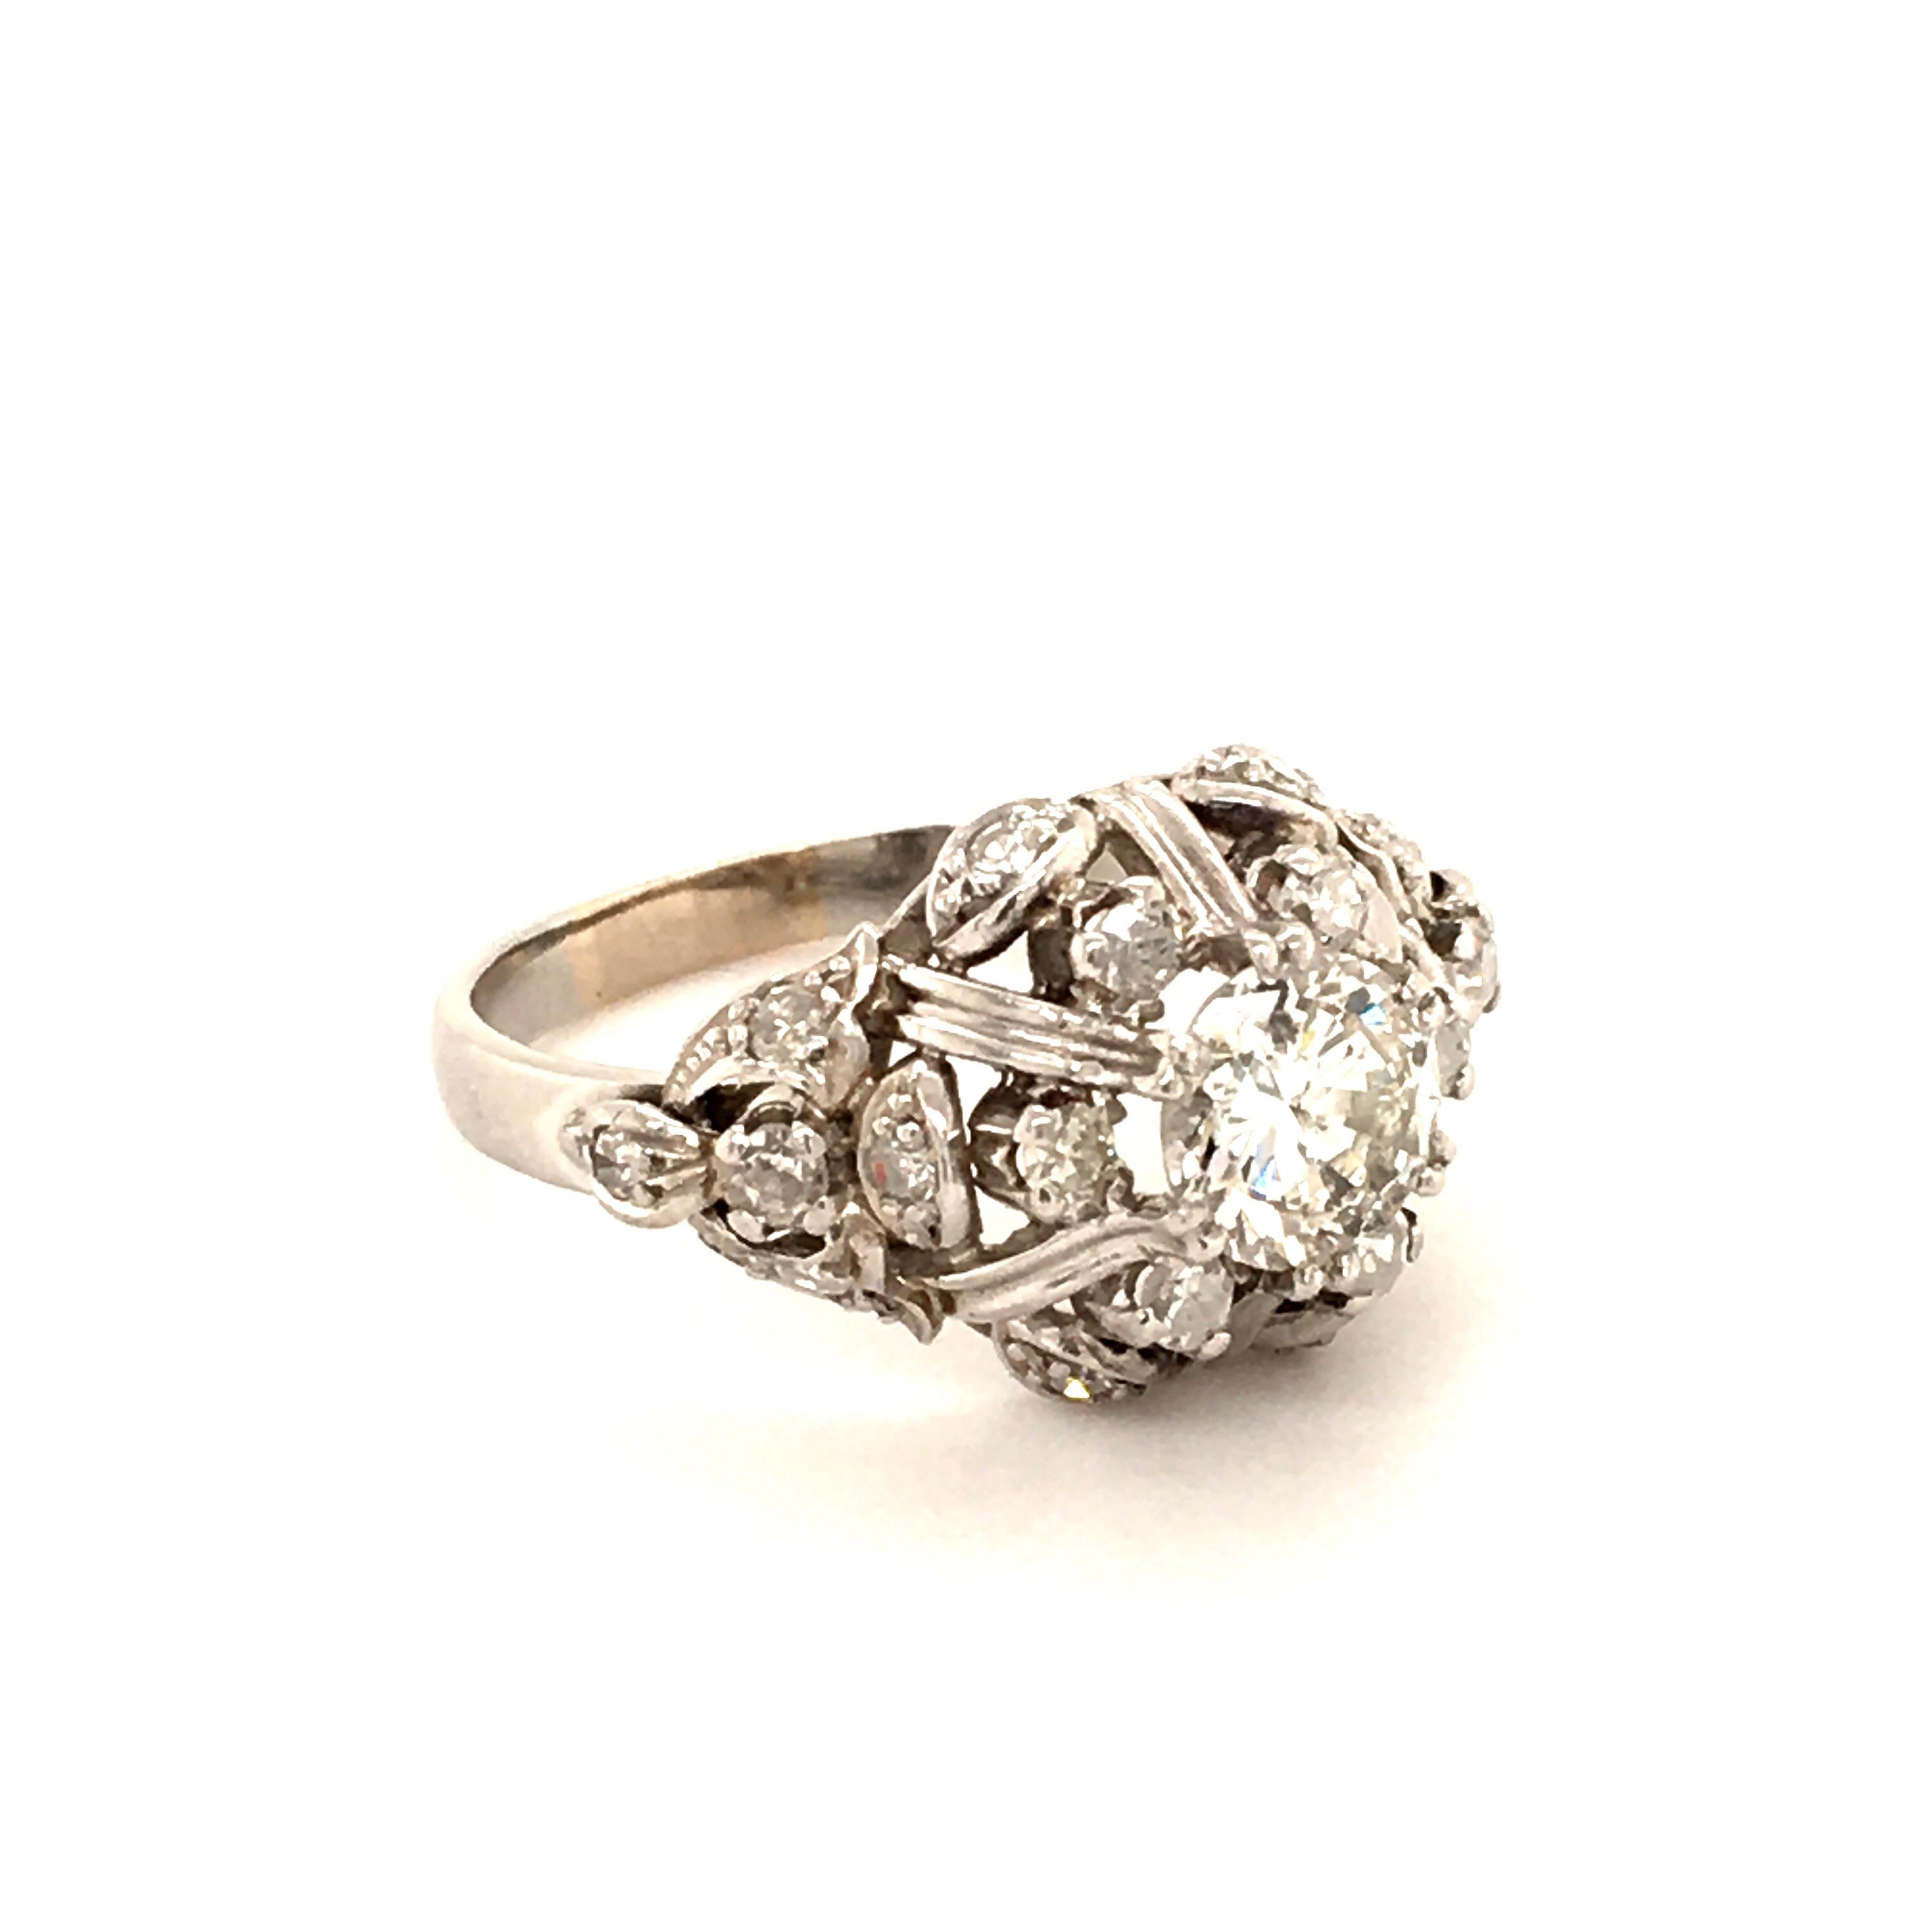 This playful ring in platinum is set in the center with a round brilliant-cut diamond of 0.84 ct which is of H/I-I1 quality. The ornate and complex mounting is decorated with 20 single-cut diamonds totalling 0.48 ct.
Ring band is engraved with